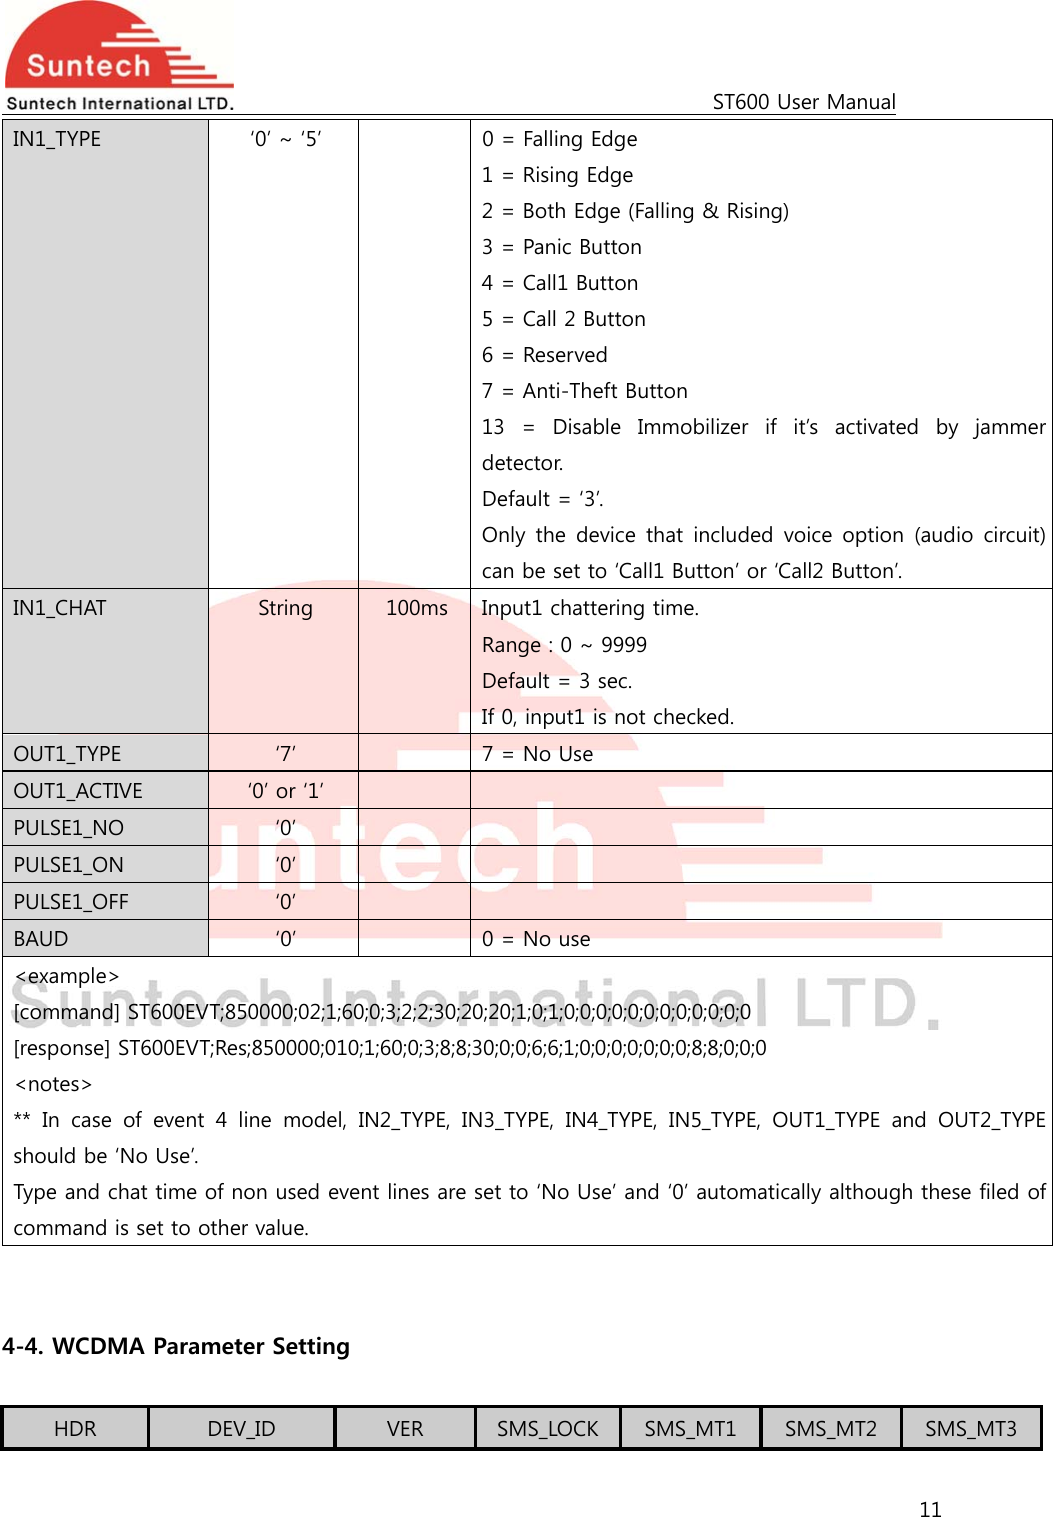                                                                                             ST600 User Manual 11  IN1_TYPE  ‘0’ ~ ‘5’    0 = Falling Edge 1 = Rising Edge 2 = Both Edge (Falling &amp; Rising) 3 = Panic Button 4 = Call1 Button 5 = Call 2 Button 6 = Reserved 7 = Anti-Theft Button 13  =  Disable  Immobilizer  if  it’s  activated  by  jammer detector. Default = ‘3’. Only  the  device  that  included  voice  option  (audio  circuit) can be set to ‘Call1 Button’ or ‘Call2 Button’. IN1_CHAT  String  100ms  Input1 chattering time.   Range : 0 ~ 9999 Default = 3 sec. If 0, input1 is not checked. OUT1_TYPE  ‘7’    7 = No Use OUT1_ACTIVE  ‘0’ or ‘1’     PULSE1_NO  ‘0’     PULSE1_ON  ‘0’     PULSE1_OFF  ‘0’     BAUD  ‘0’    0 = No use &lt;example&gt; [command] ST600EVT;850000;02;1;60;0;3;2;2;30;20;20;1;0;1;0;0;0;0;0;0;0;0;0;0;0;0 [response] ST600EVT;Res;850000;010;1;60;0;3;8;8;30;0;0;6;6;1;0;0;0;0;0;0;0;8;8;0;0;0 &lt;notes&gt; ** In case of event 4 line model, IN2_TYPE, IN3_TYPE, IN4_TYPE, IN5_TYPE, OUT1_TYPE and OUT2_TYPE should be ‘No Use’. Type and chat time of non used event lines are set to ‘No Use’ and ‘0’ automatically although these filed of command is set to other value.   4-4. WCDMA Parameter Setting  HDR  DEV_ID  VER  SMS_LOCK  SMS_MT1  SMS_MT2  SMS_MT3 